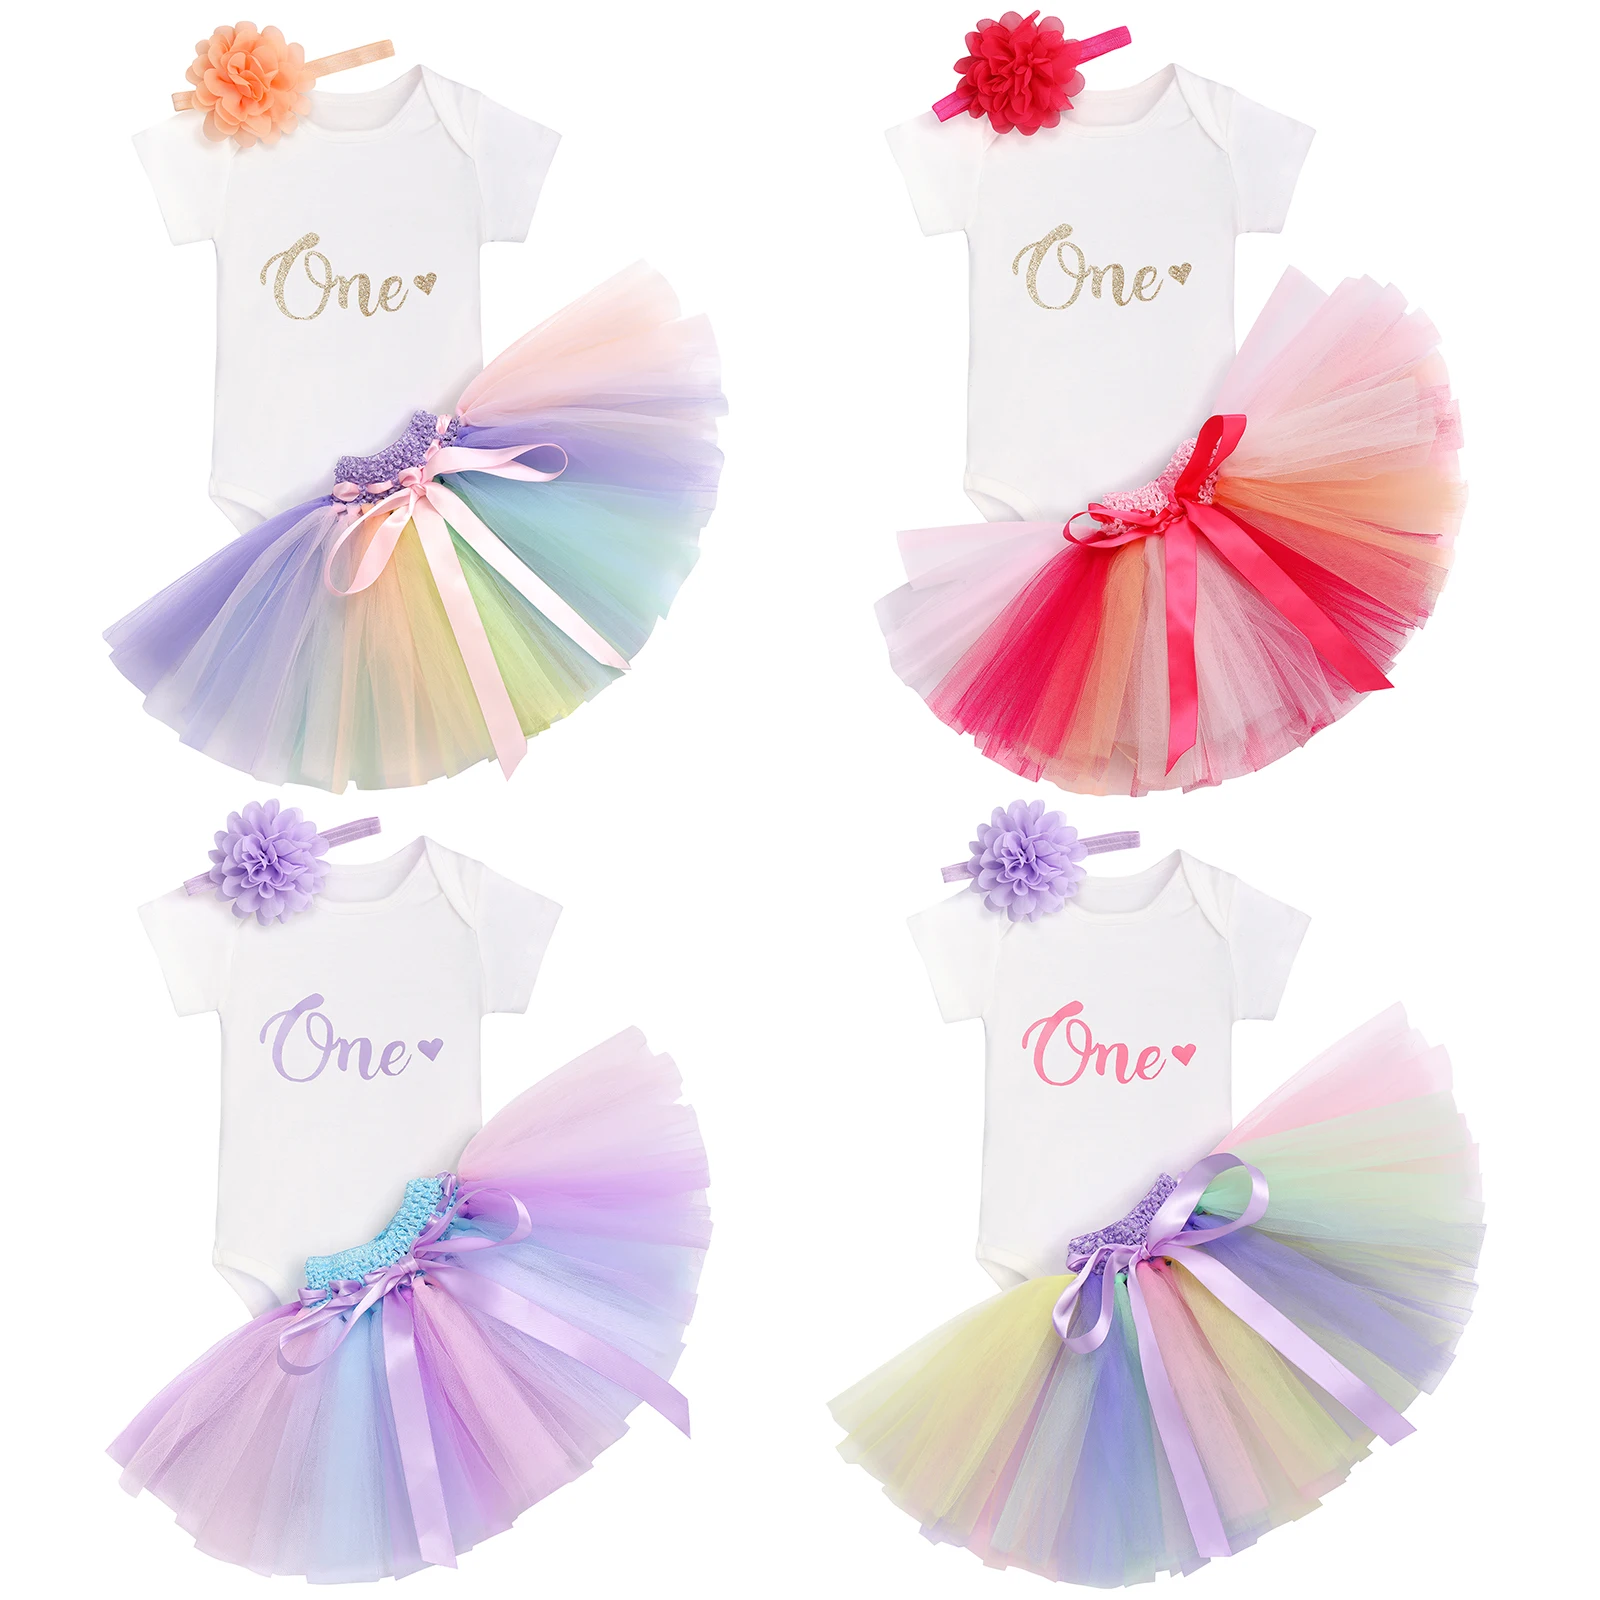 9-18M Baby Girls Birthday Party Dress Summer Newborn Infantil Colorful Tutu Outfit Cake Smash Wedding Holiday Daily Wear